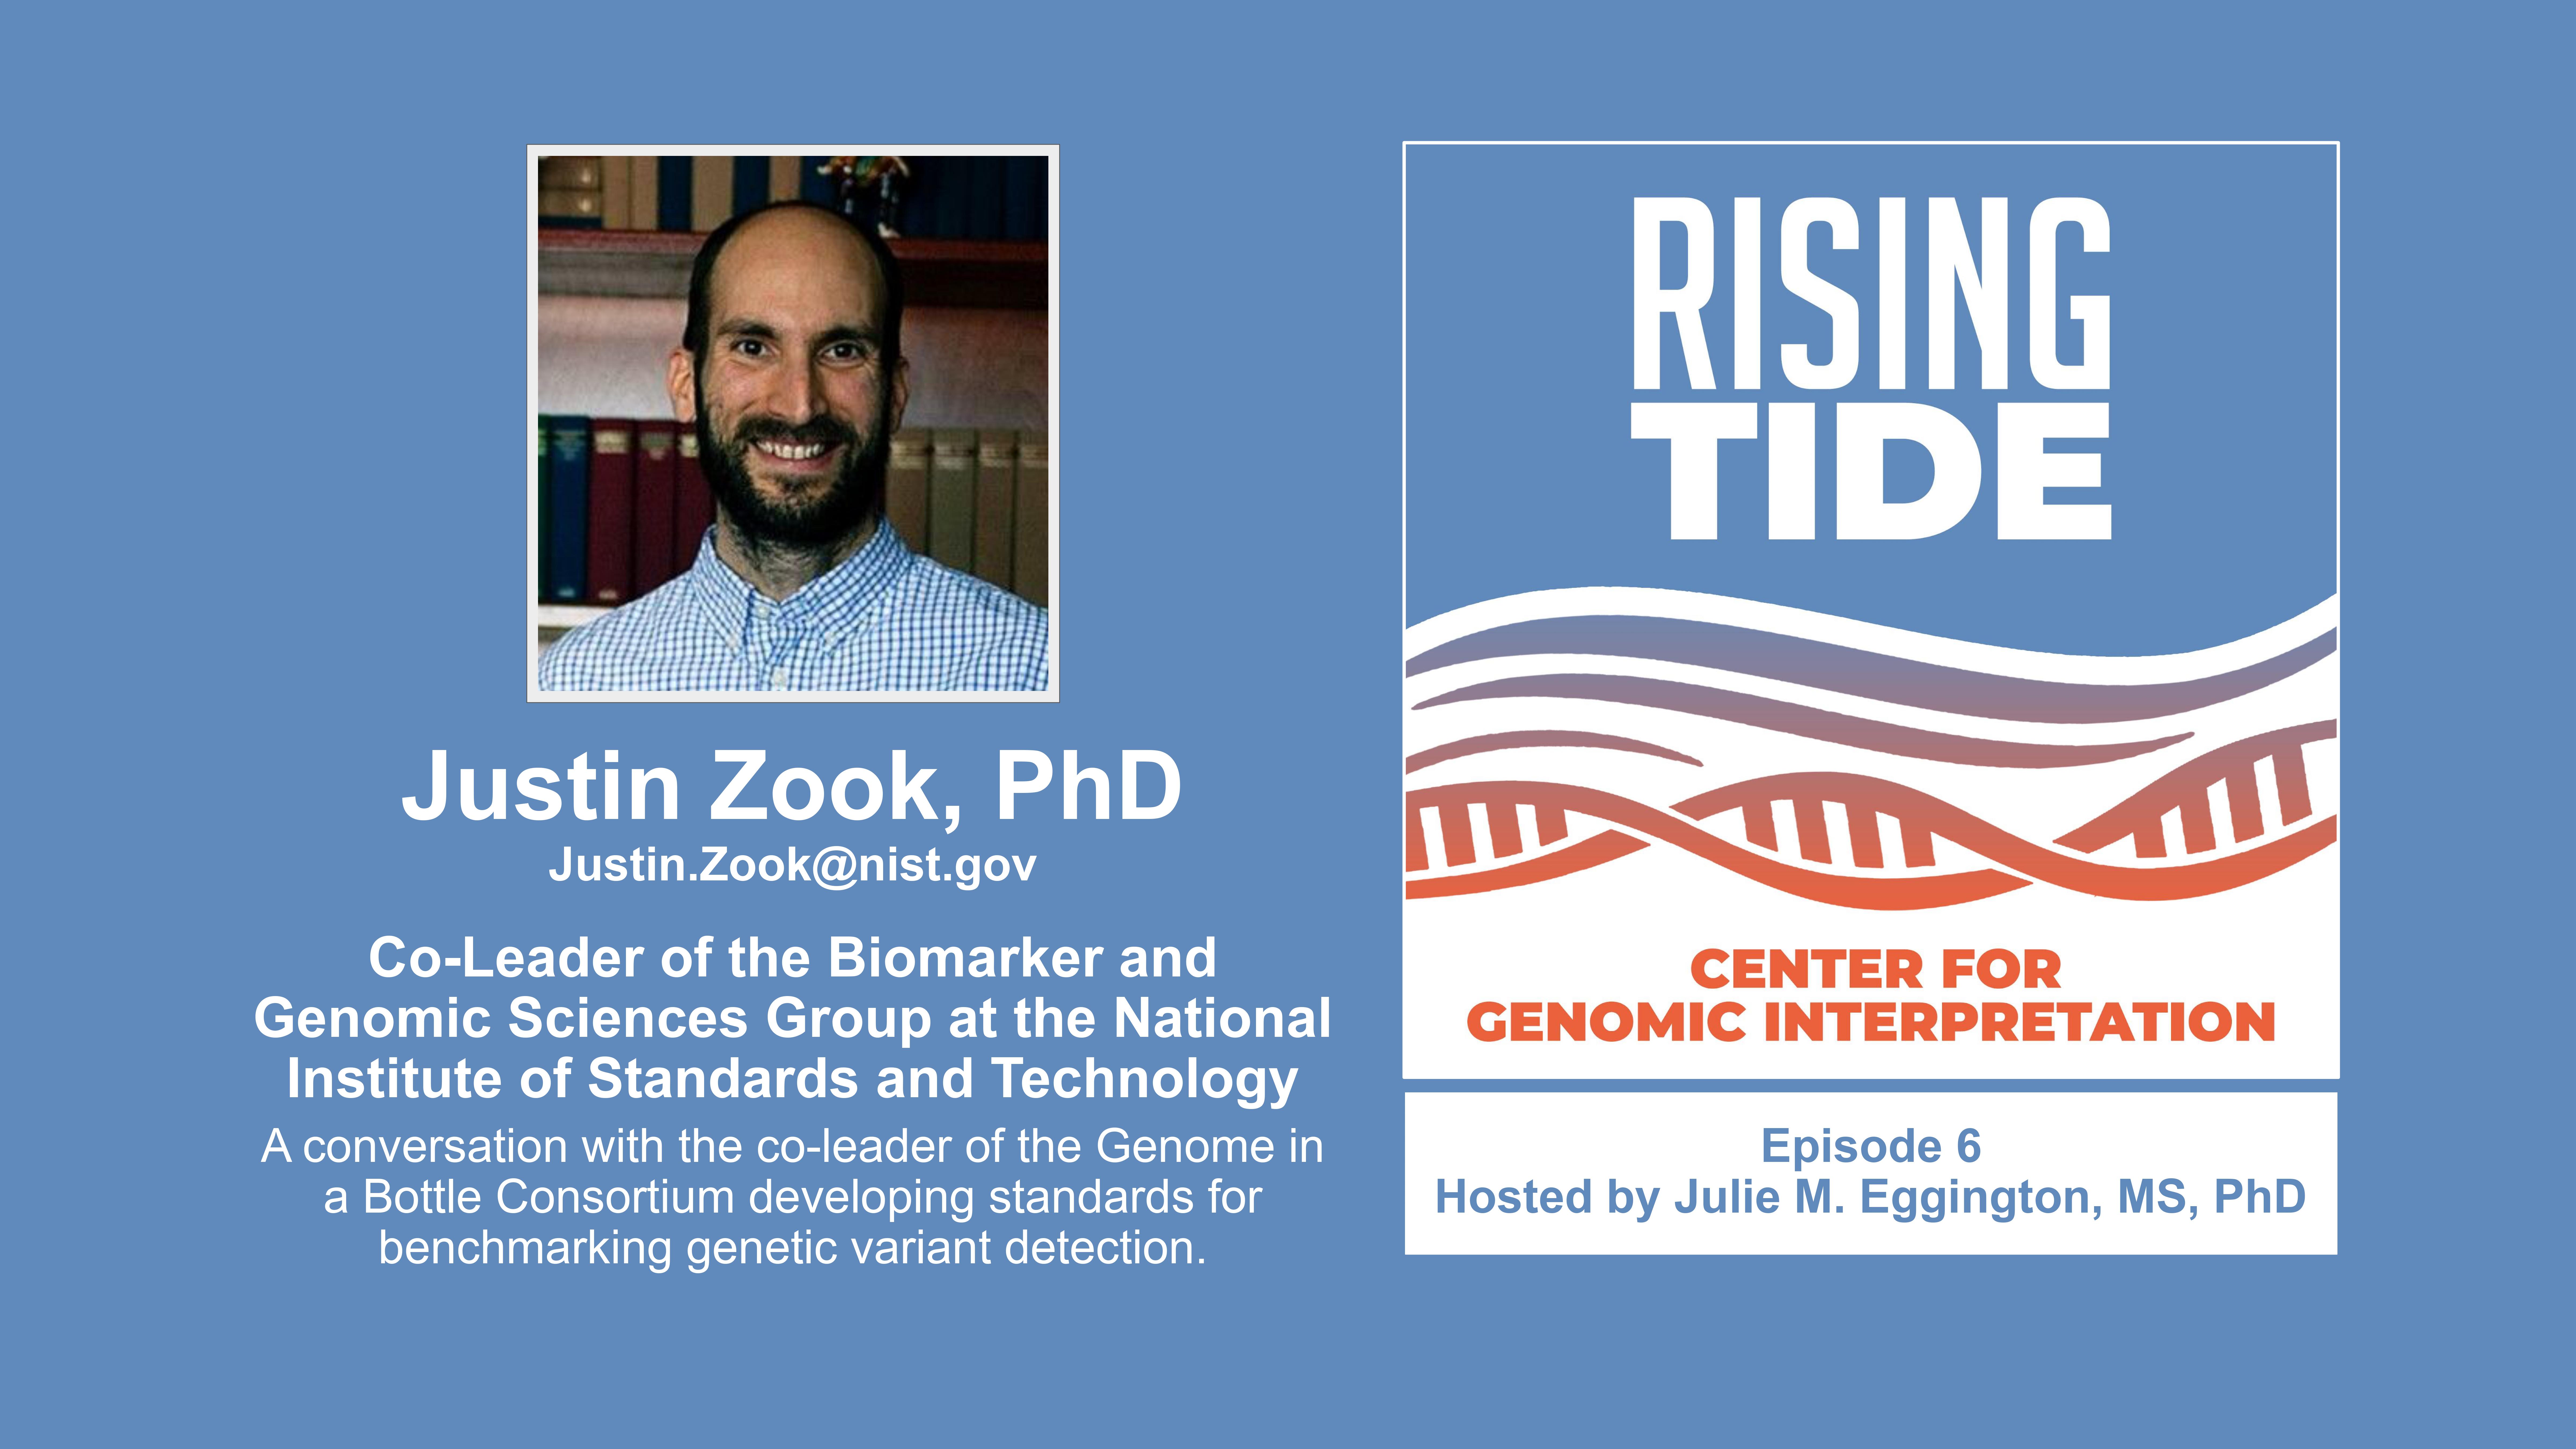 Justin Zook, PhD: A Conversation with the Co-Leader of the Genome In a Bottle Consortium Developing Standards For Benchmarking Genetic Variant Detection